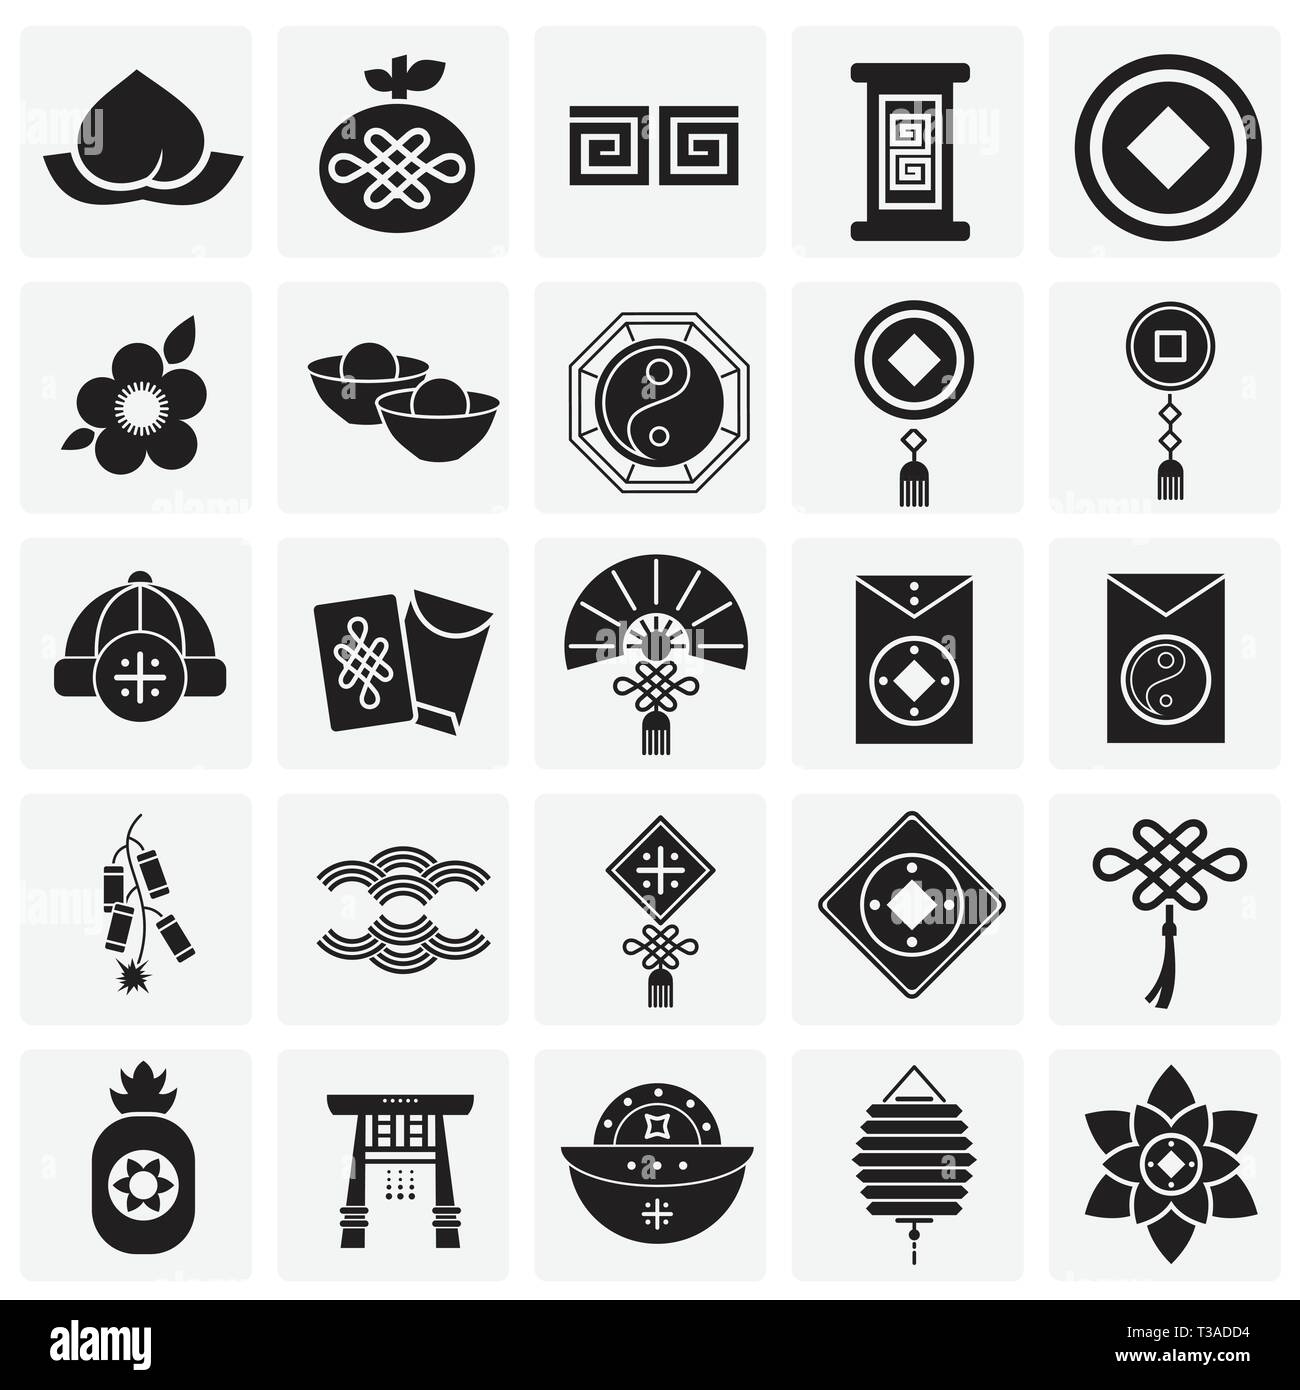 Chinese new year related icons set on squares background for graphic and web design. Simple vector sign. Internet concept symbol for website button or Stock Vector